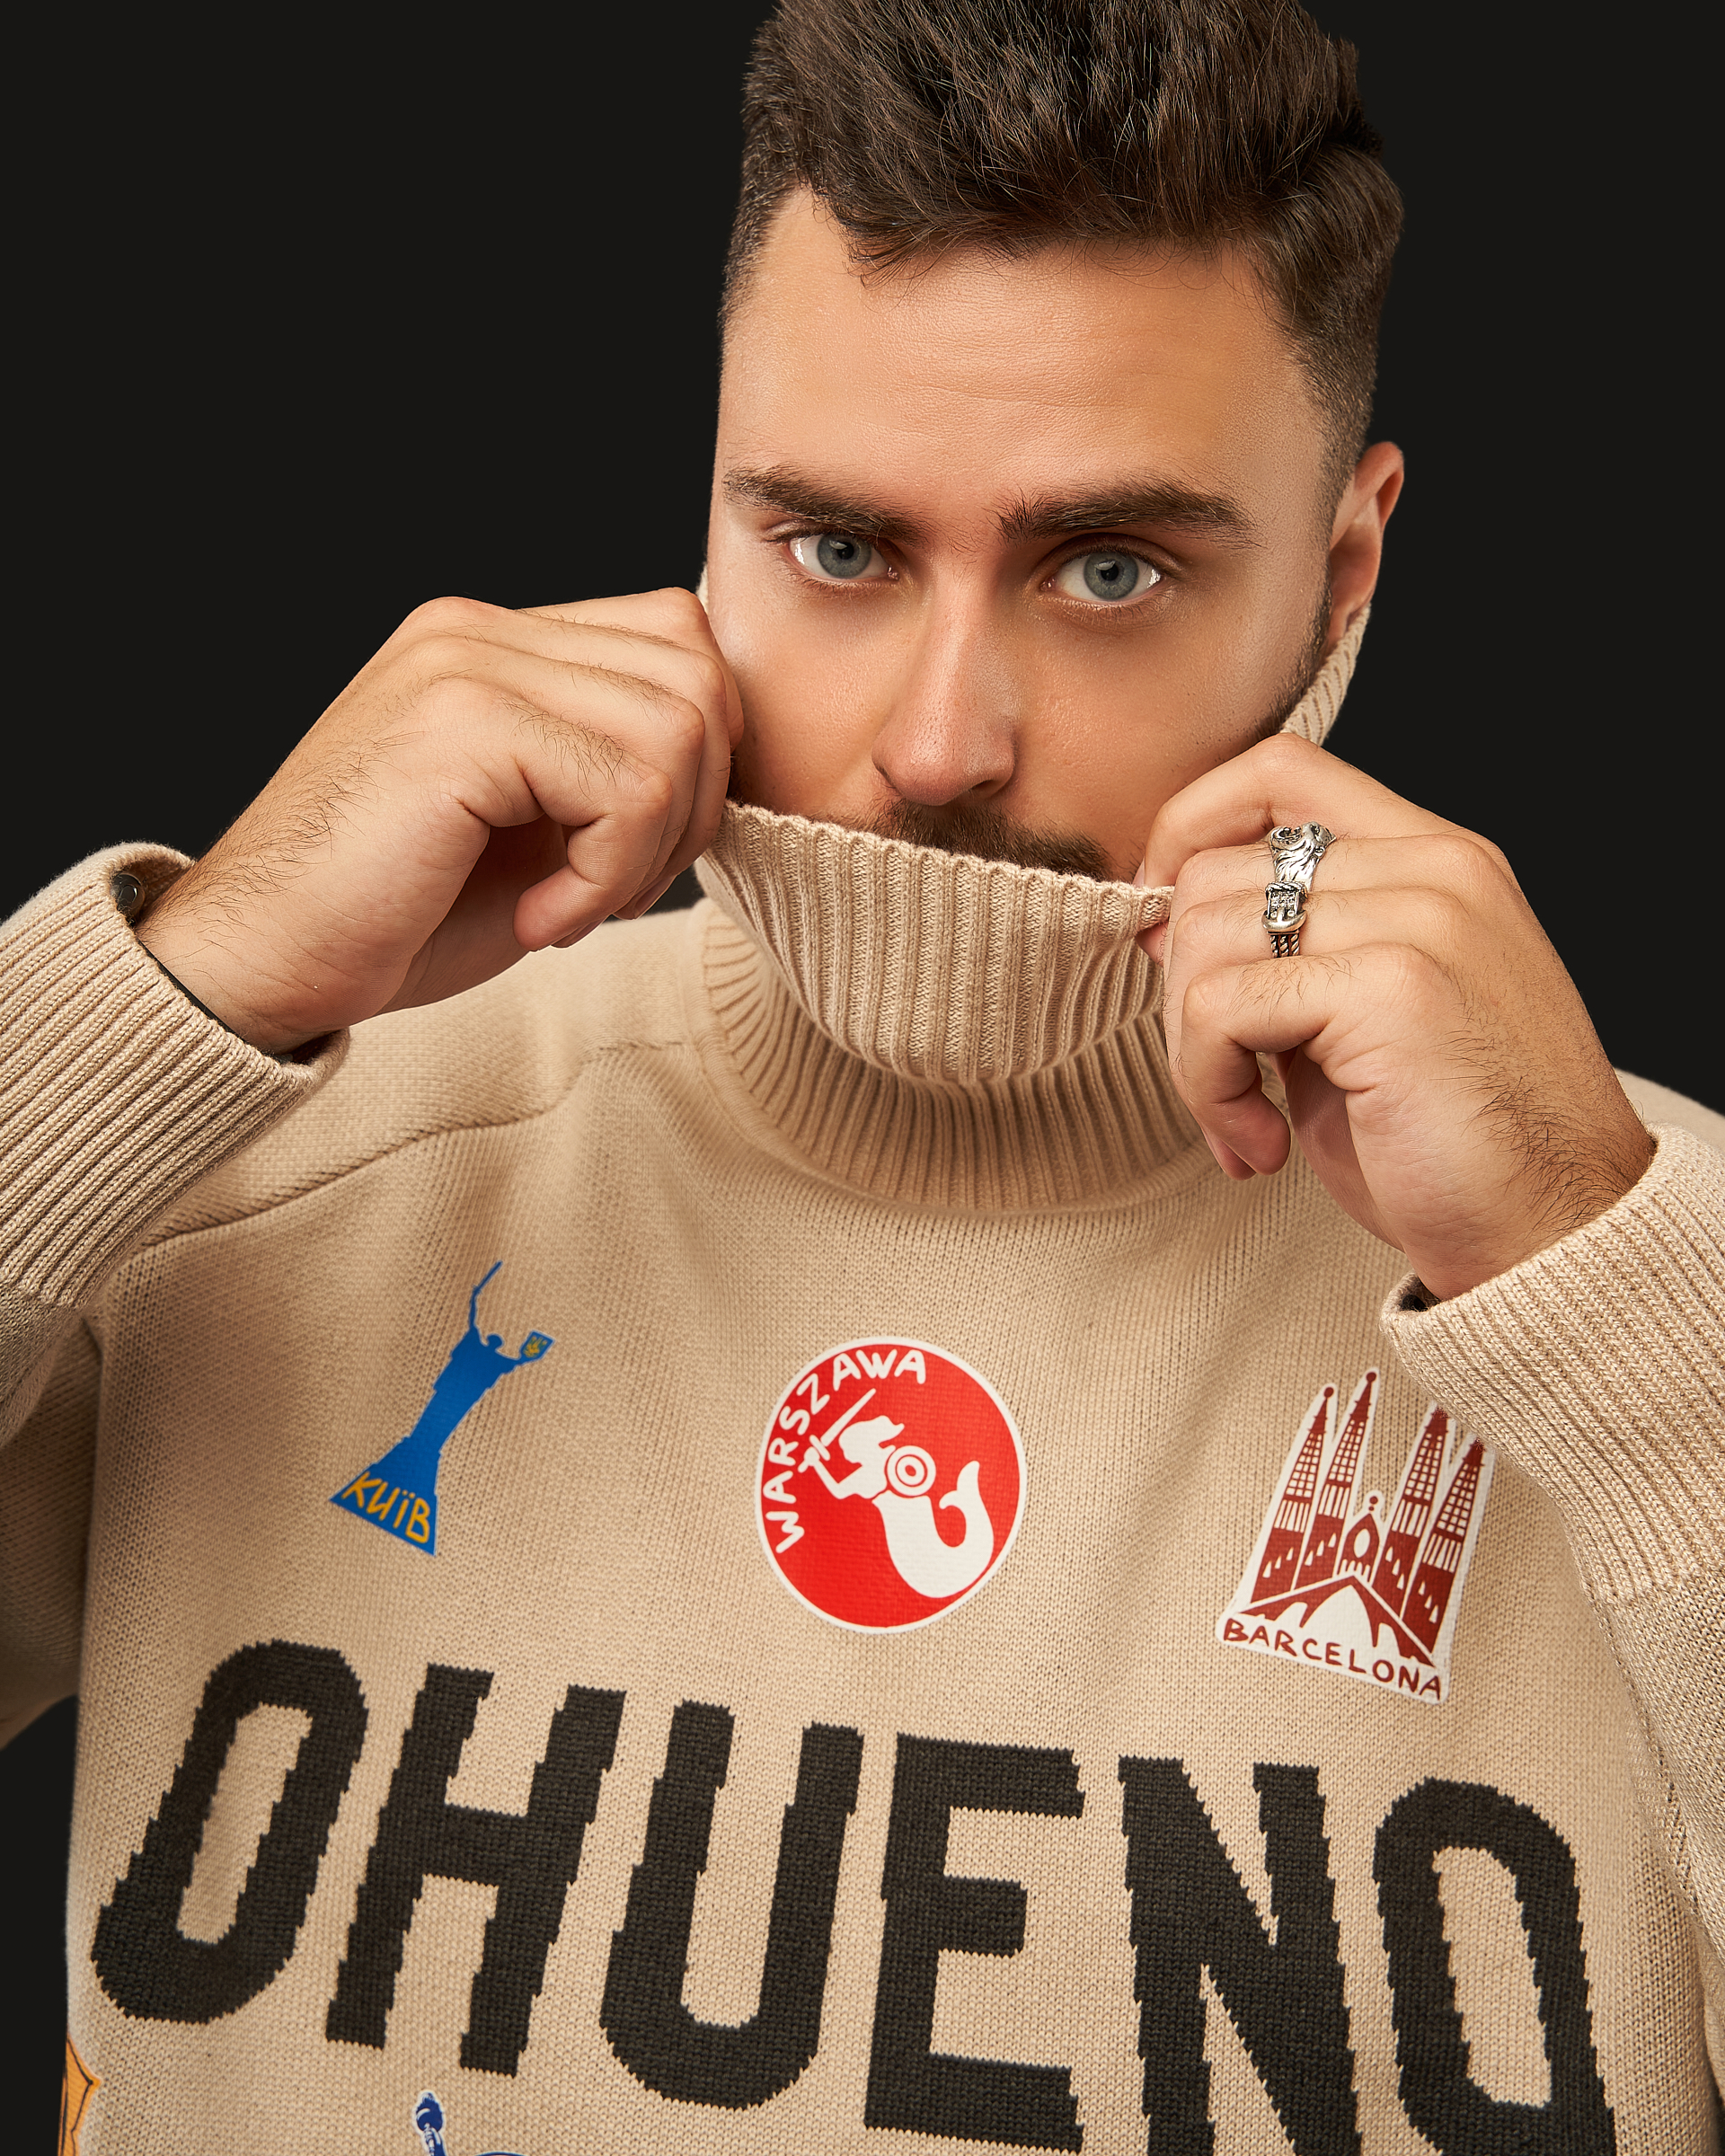 Sweater (beige) Image: https://ohueno-official.com/wp-content/uploads/m01952-1.jpg